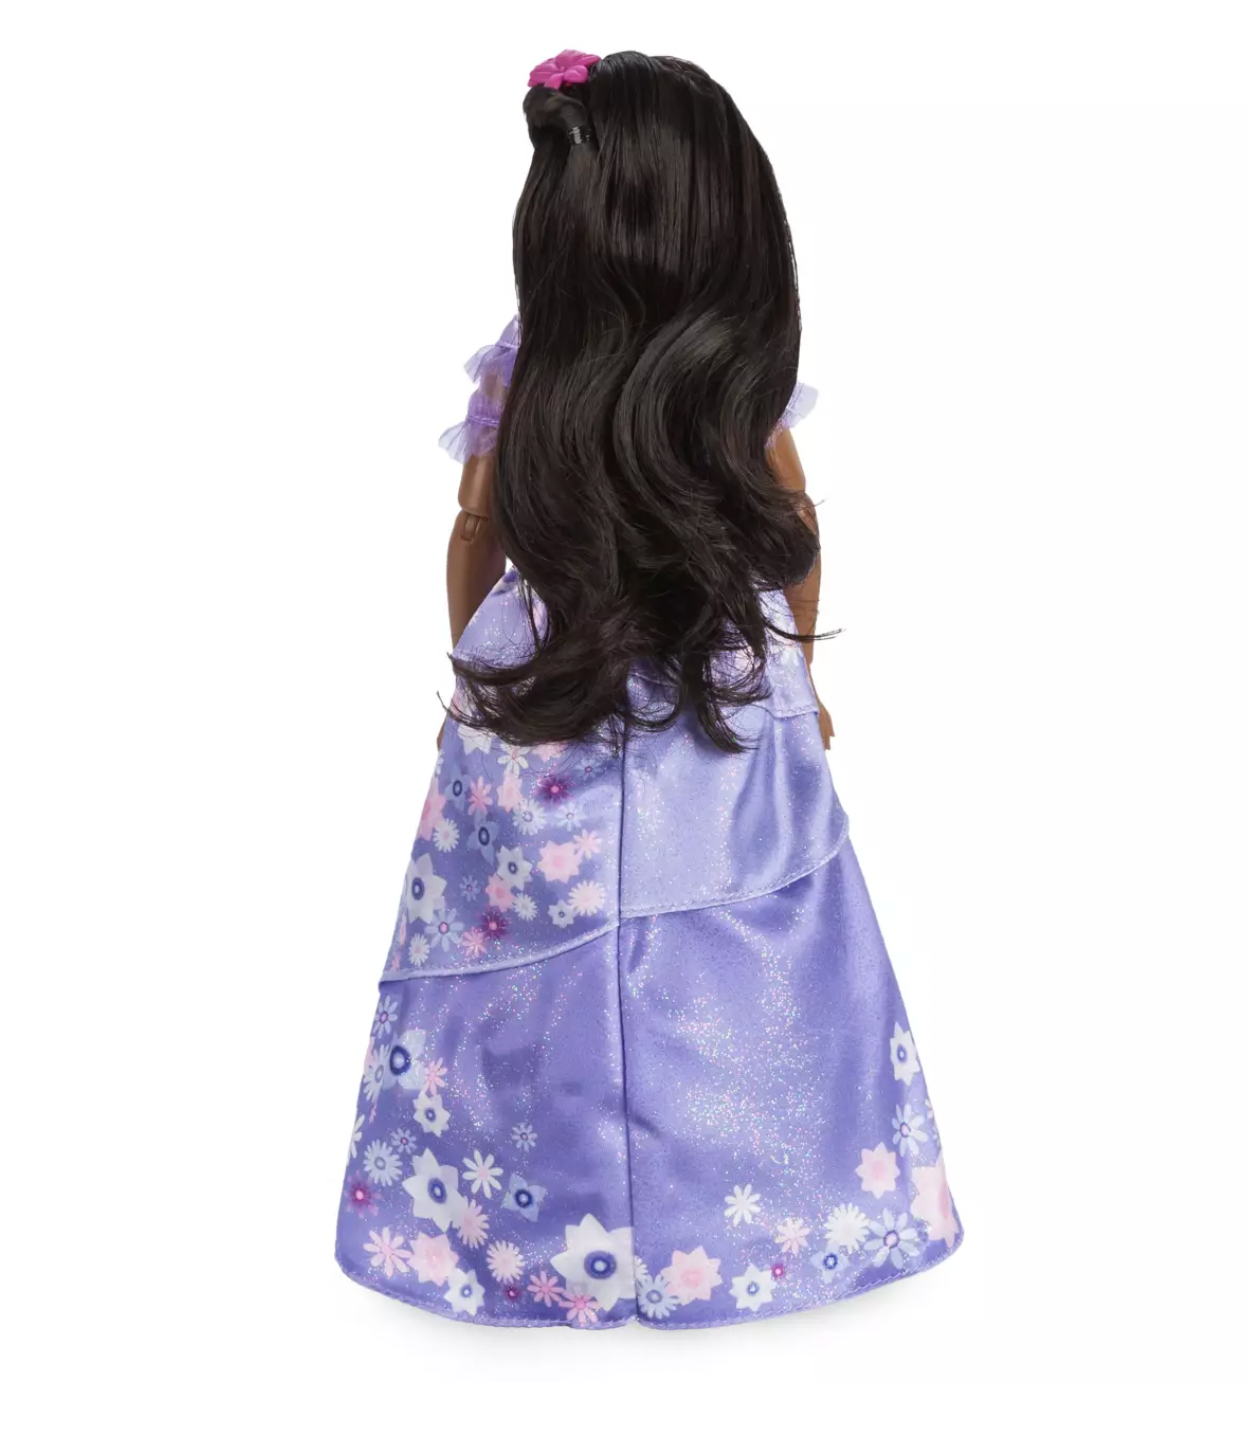 Disney Encanto Isabela Hair Play Doll Toy New with Box